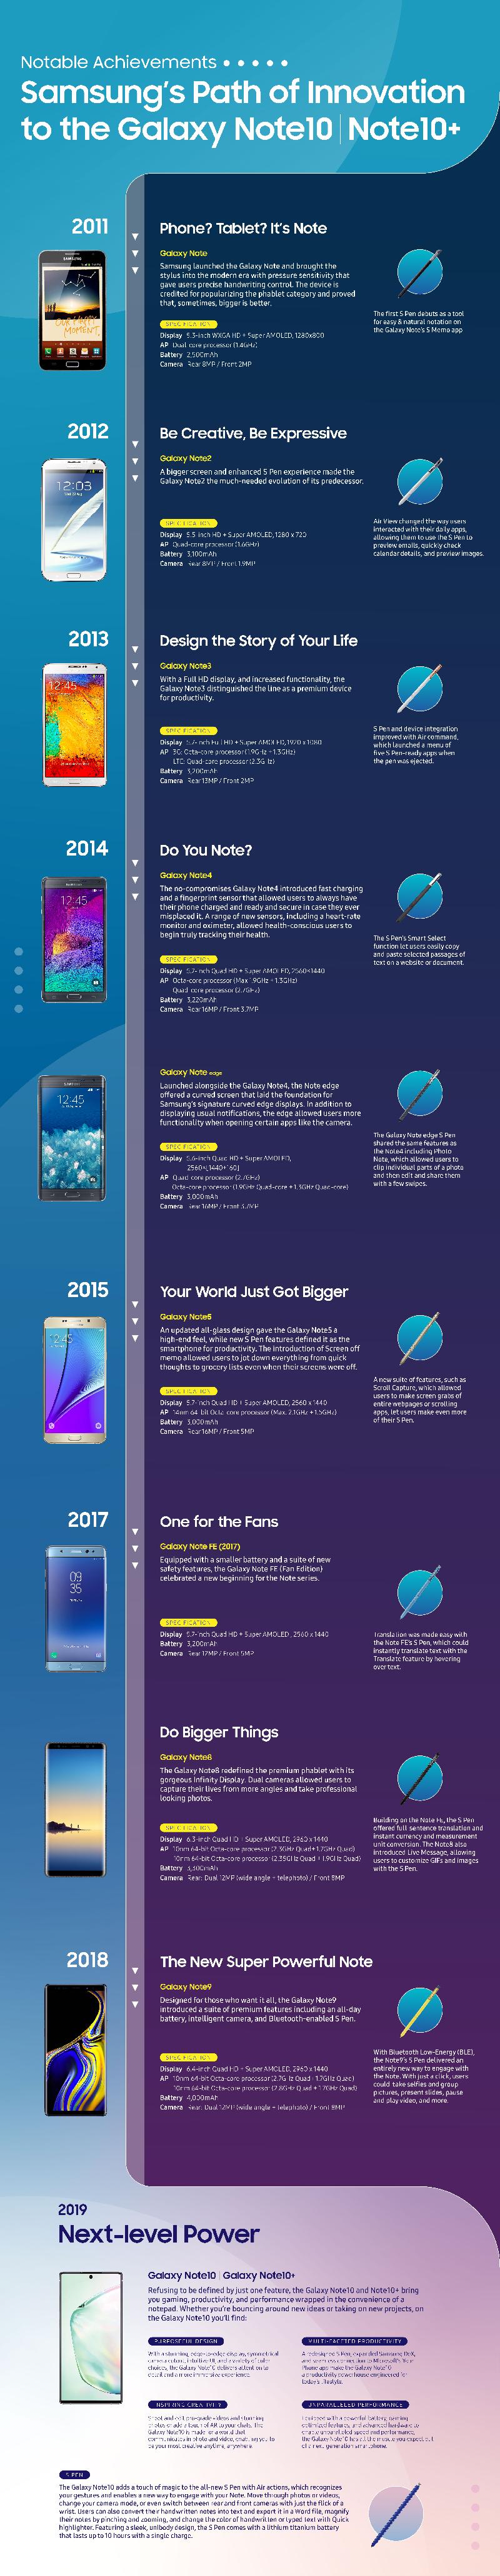 Galaxy_Note10_timeline_infographic-3.jpg